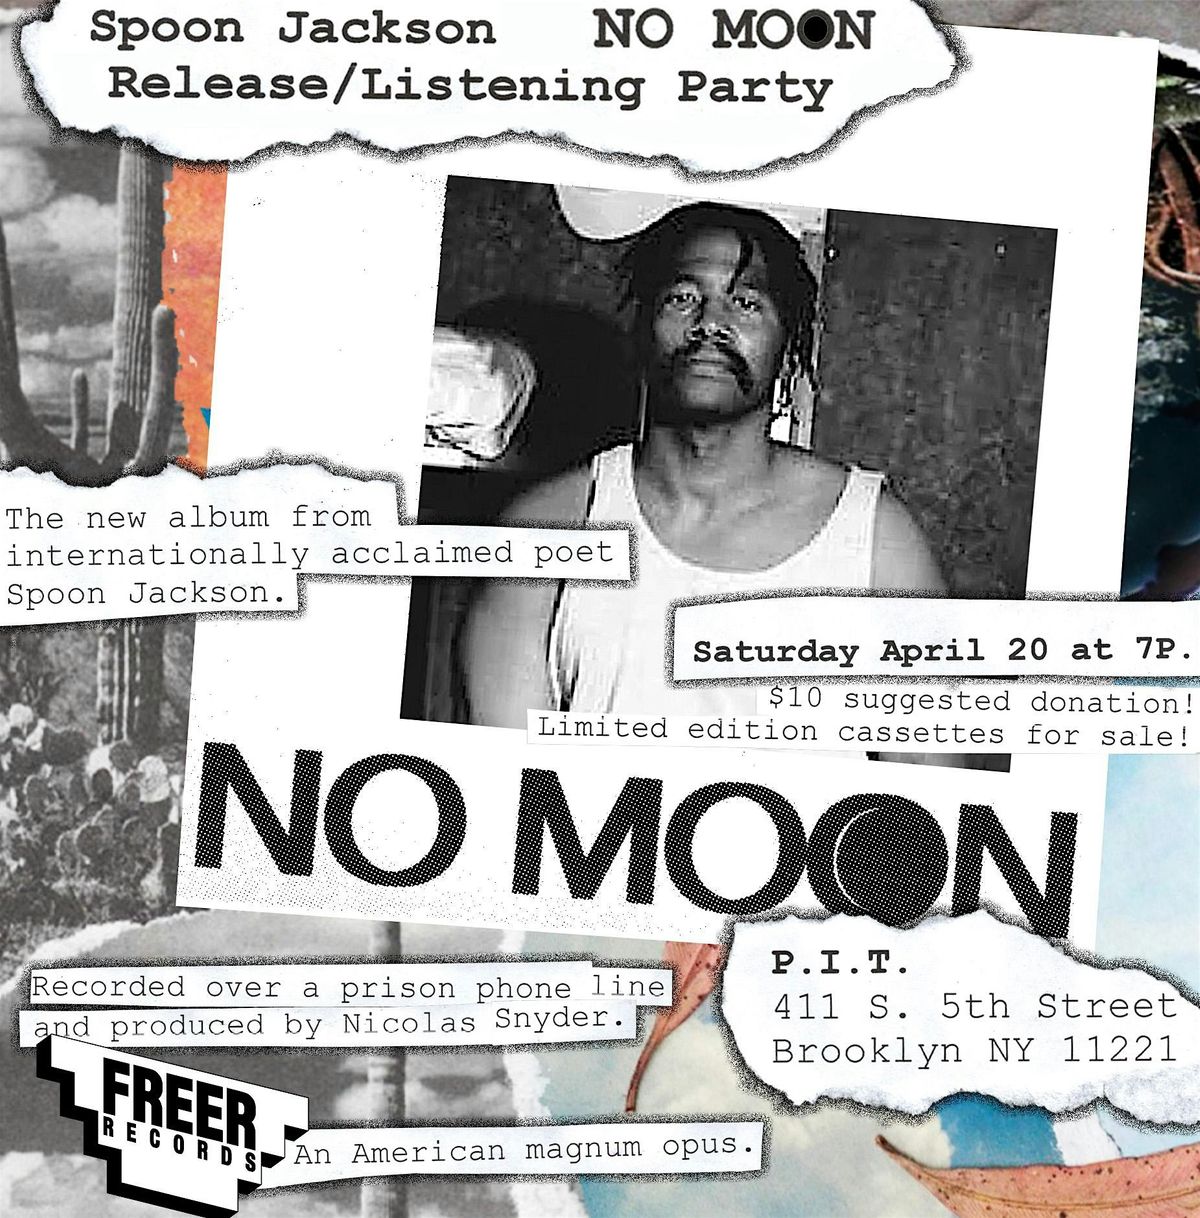 Spoon Jackson NO MOON Release\/Listening Party